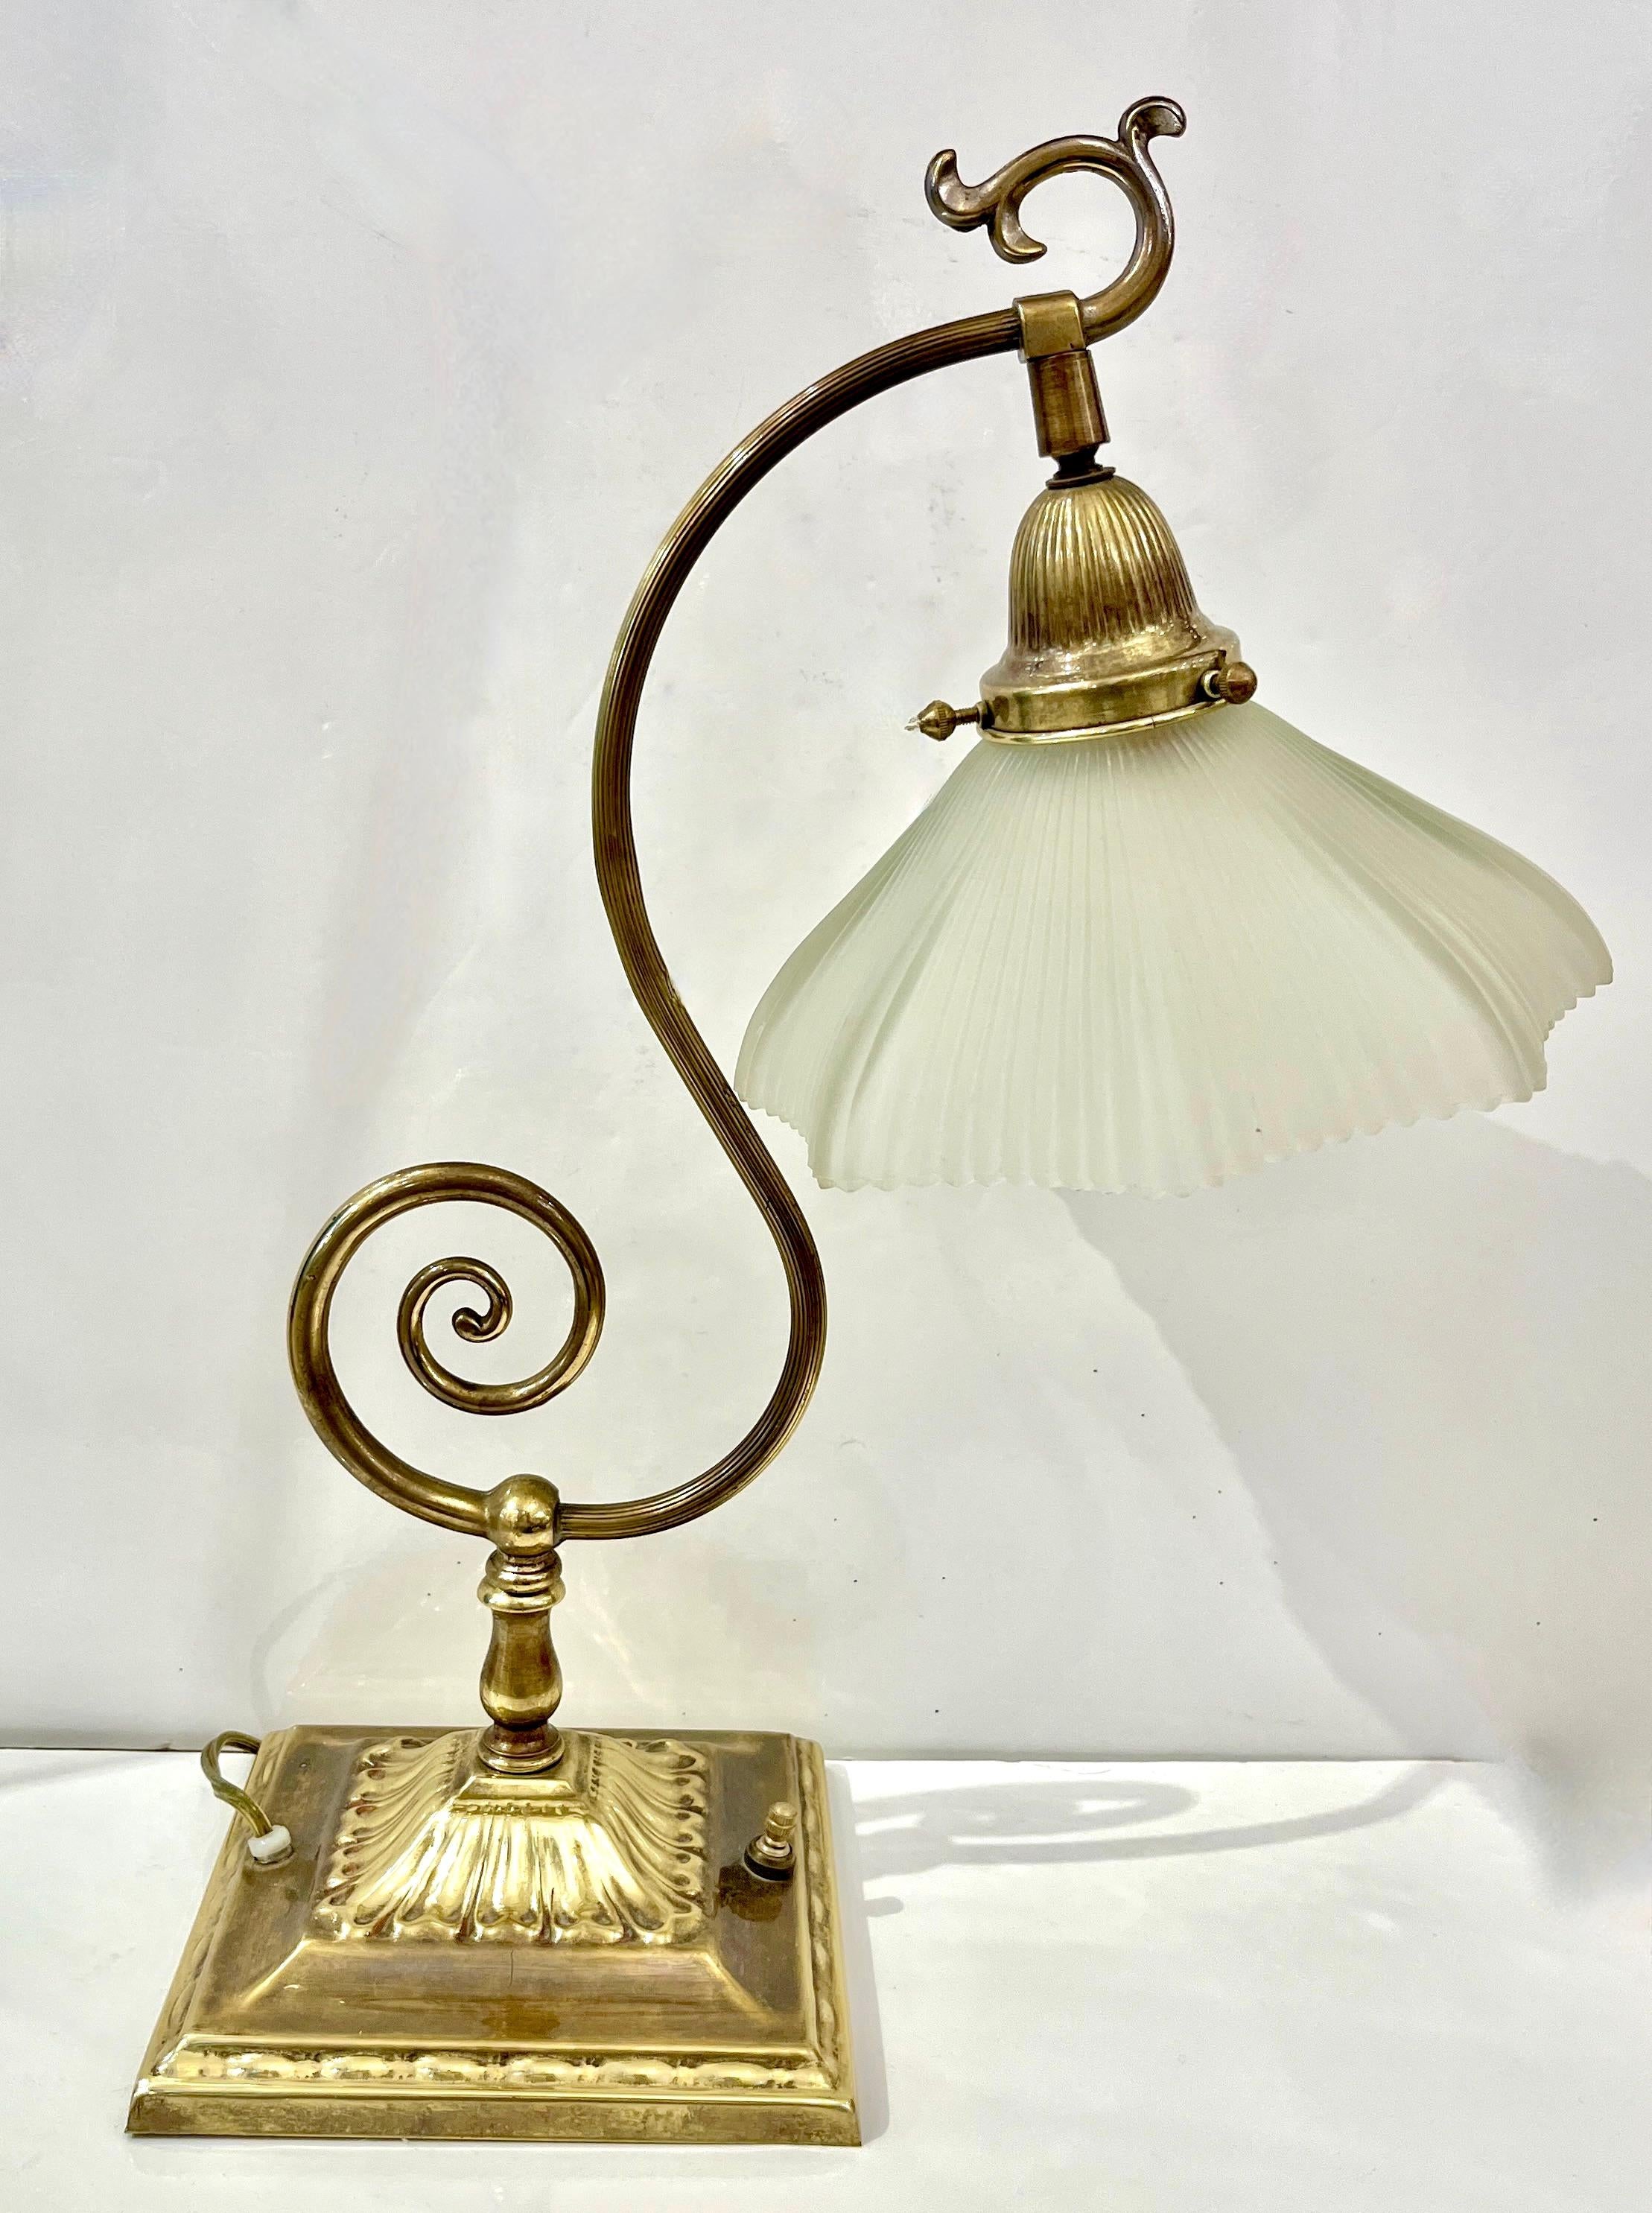 1950s American Art Deco Style Brass Table/Desk Lamp with Satin White Glass Shade For Sale 8